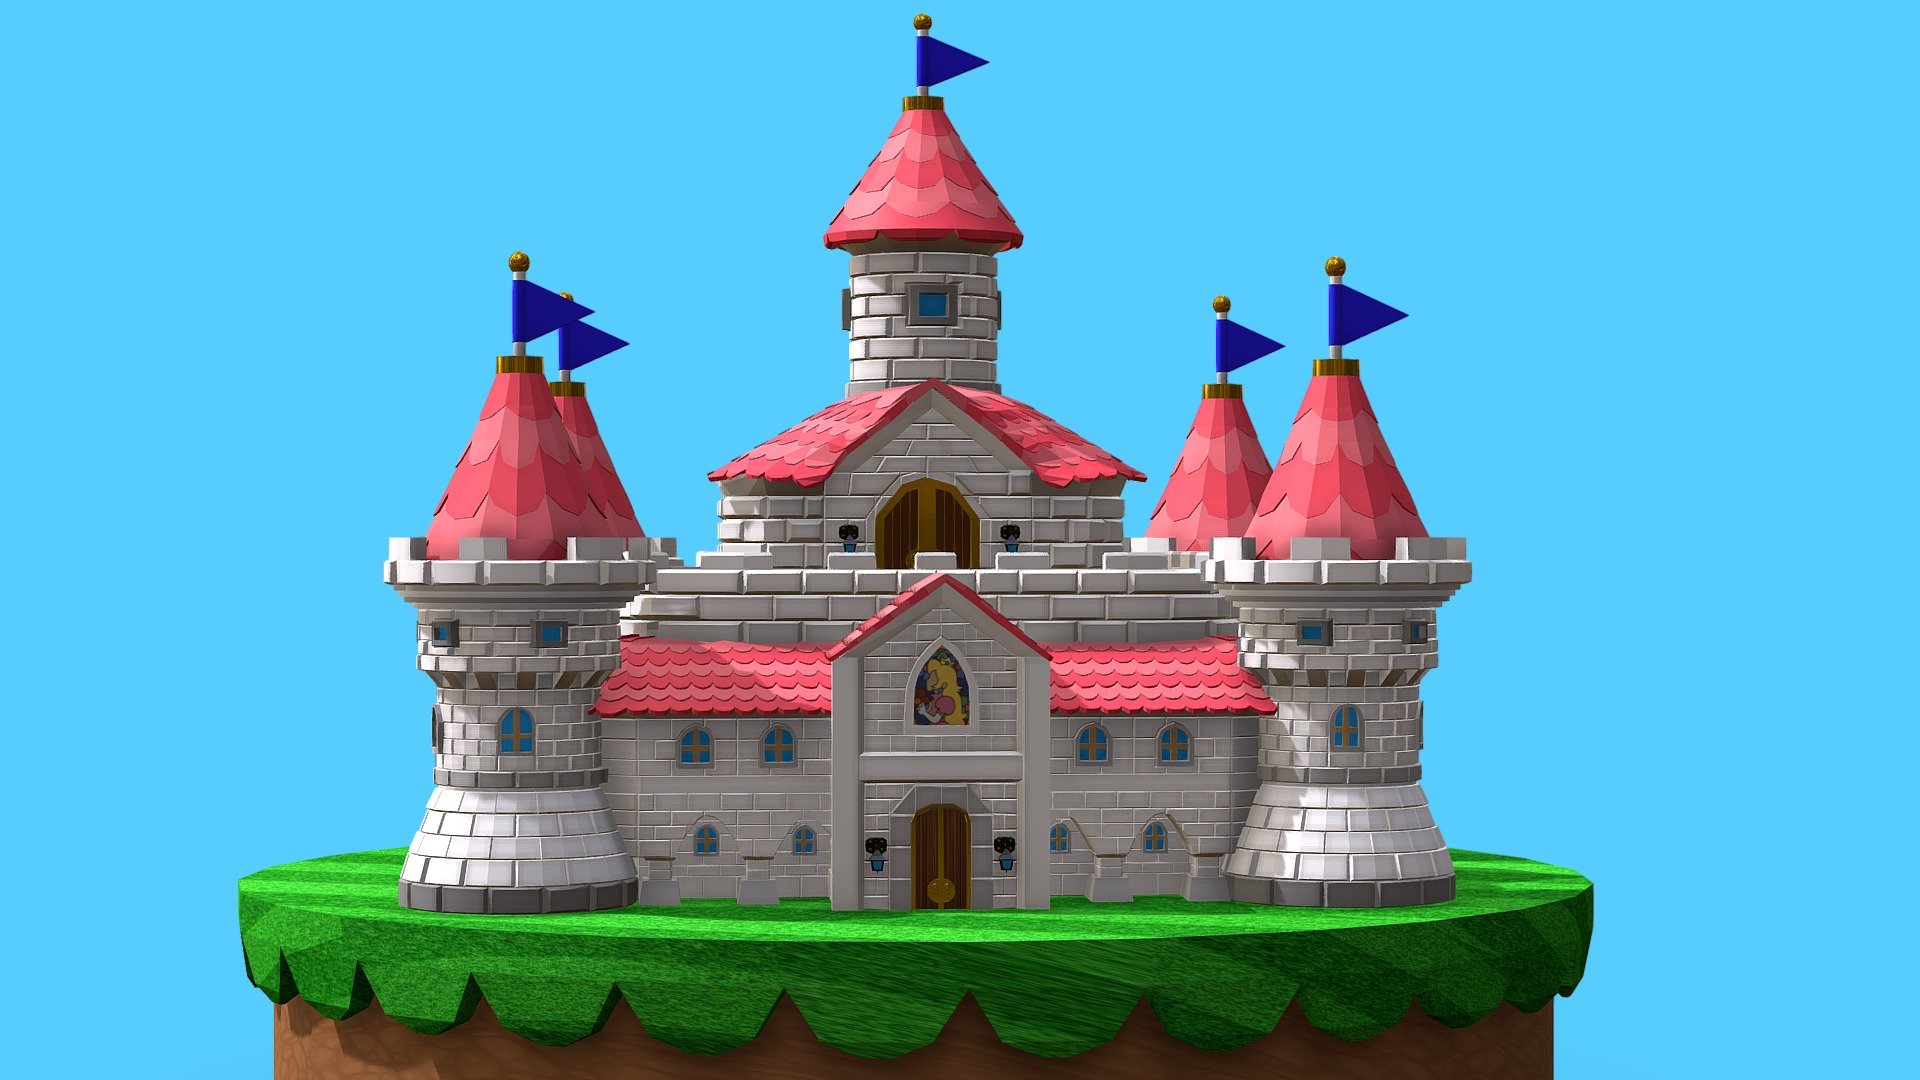 This Castle was designed based on Princess Peach's castle from Paper Mario and The Origami King.


 - Peach's Castle - Super Mario - Download Free 3D model by Luis13 (@luis230799) 3d model